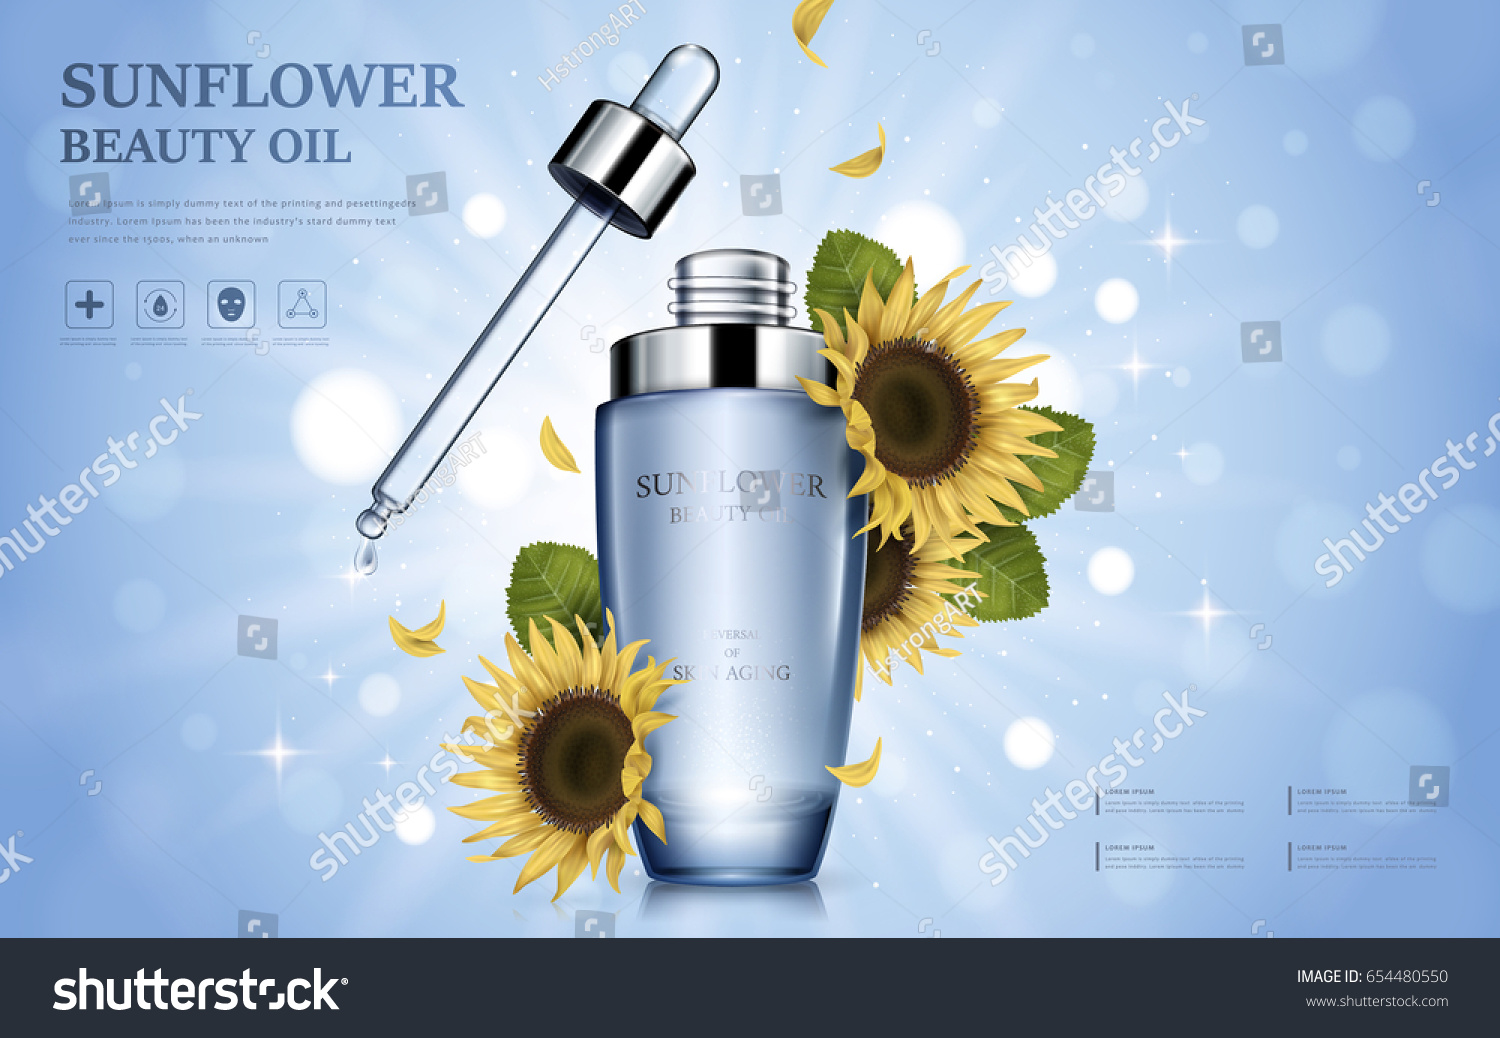 SVG of sunflower beauty oil contained in glossy bottle with flower elements, glittering bokeh background, 3d illustration svg